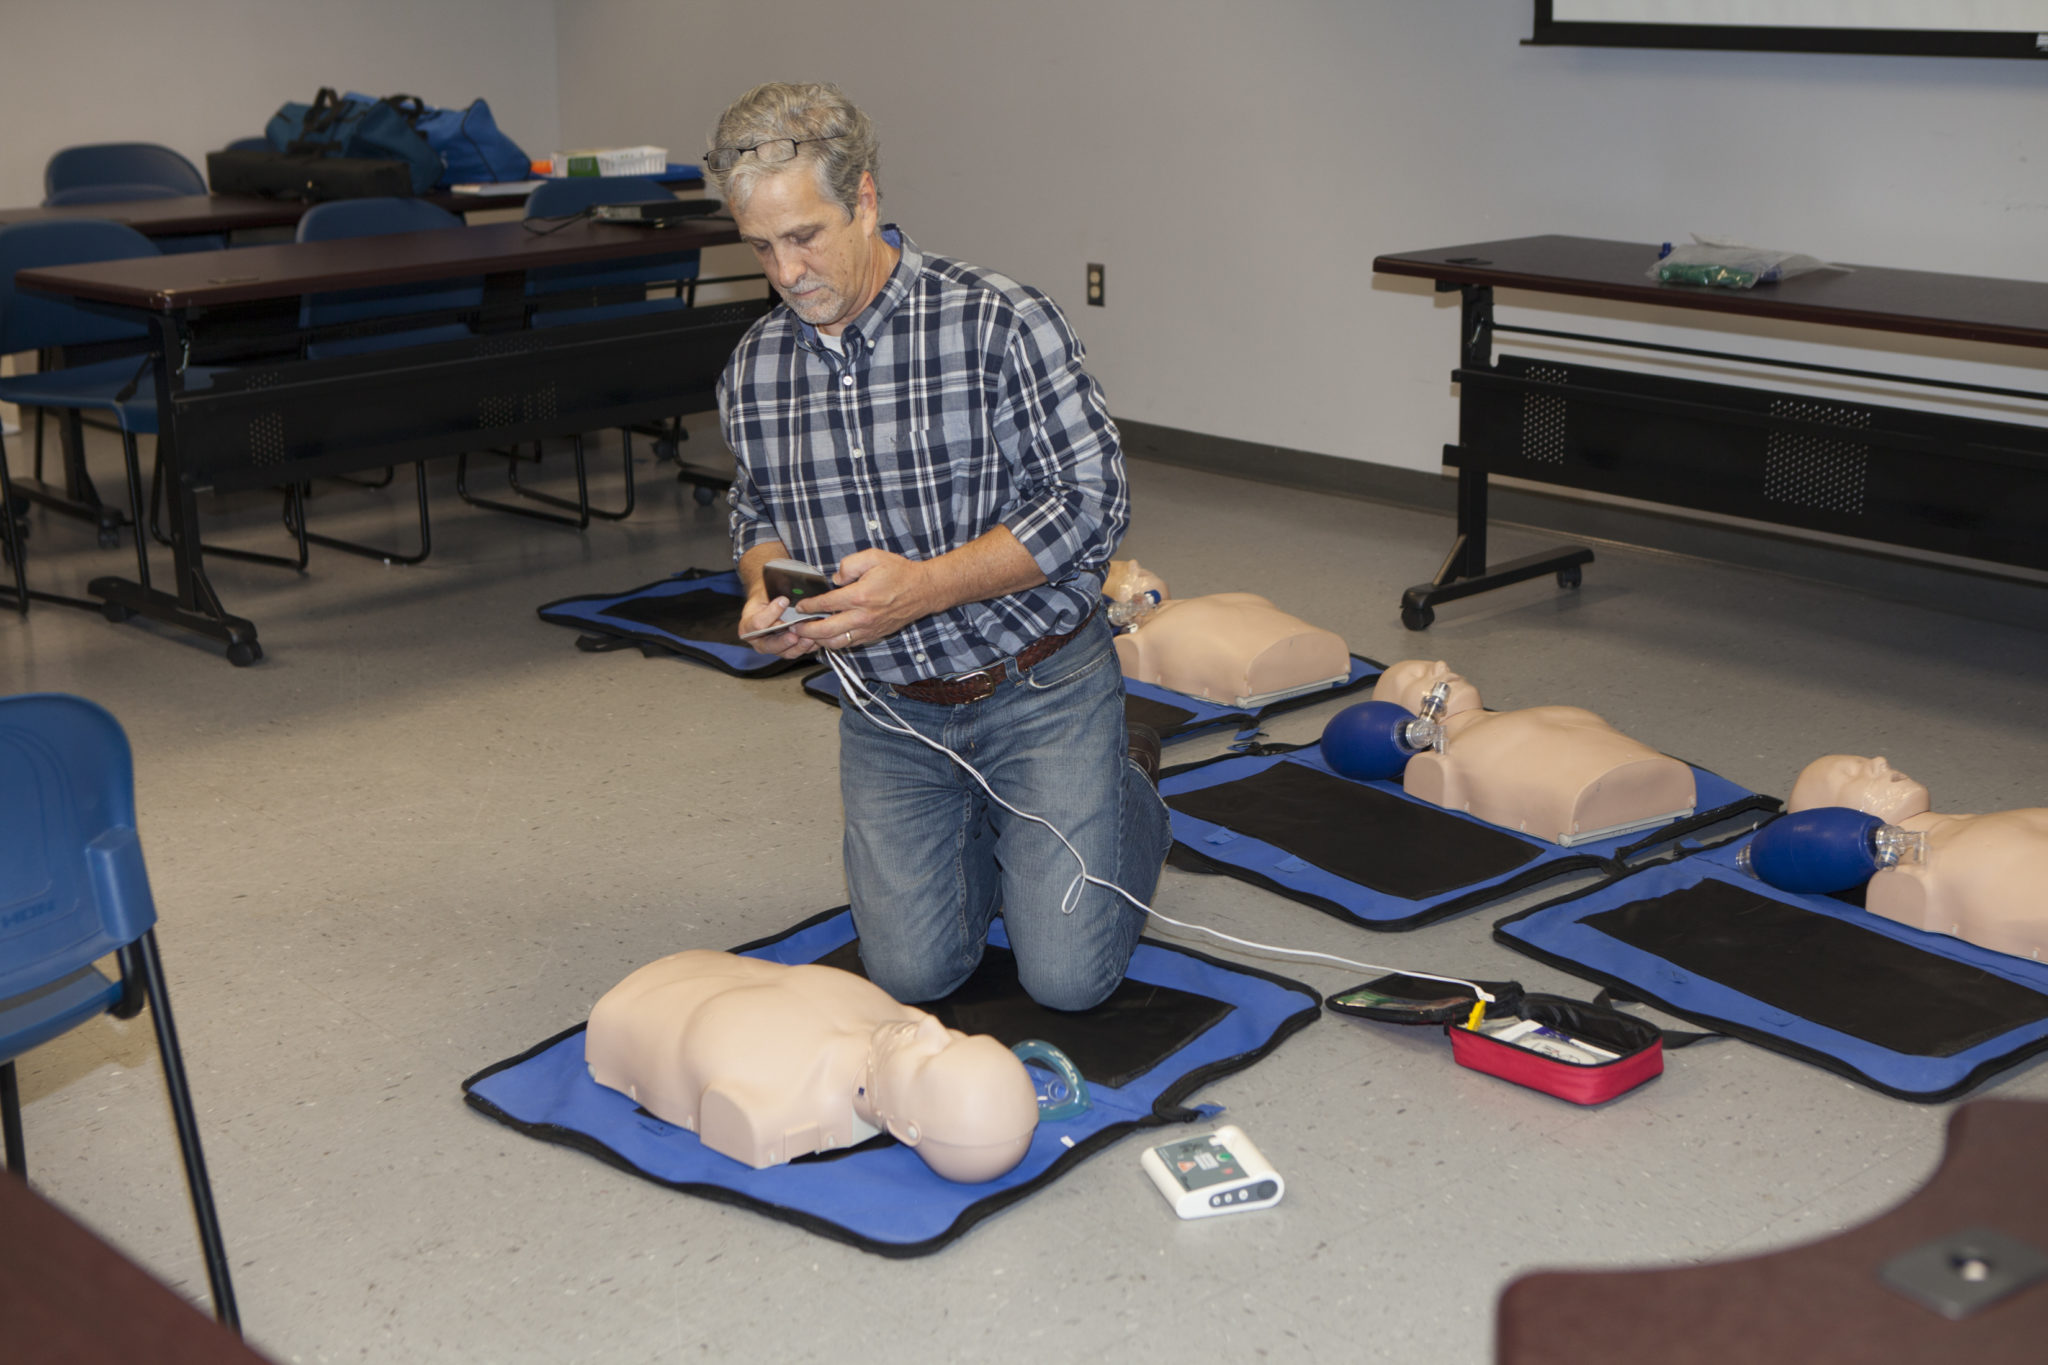 Private BLS CPR Training Class (One on One Training) *(Heartsaver CPR Training Available)